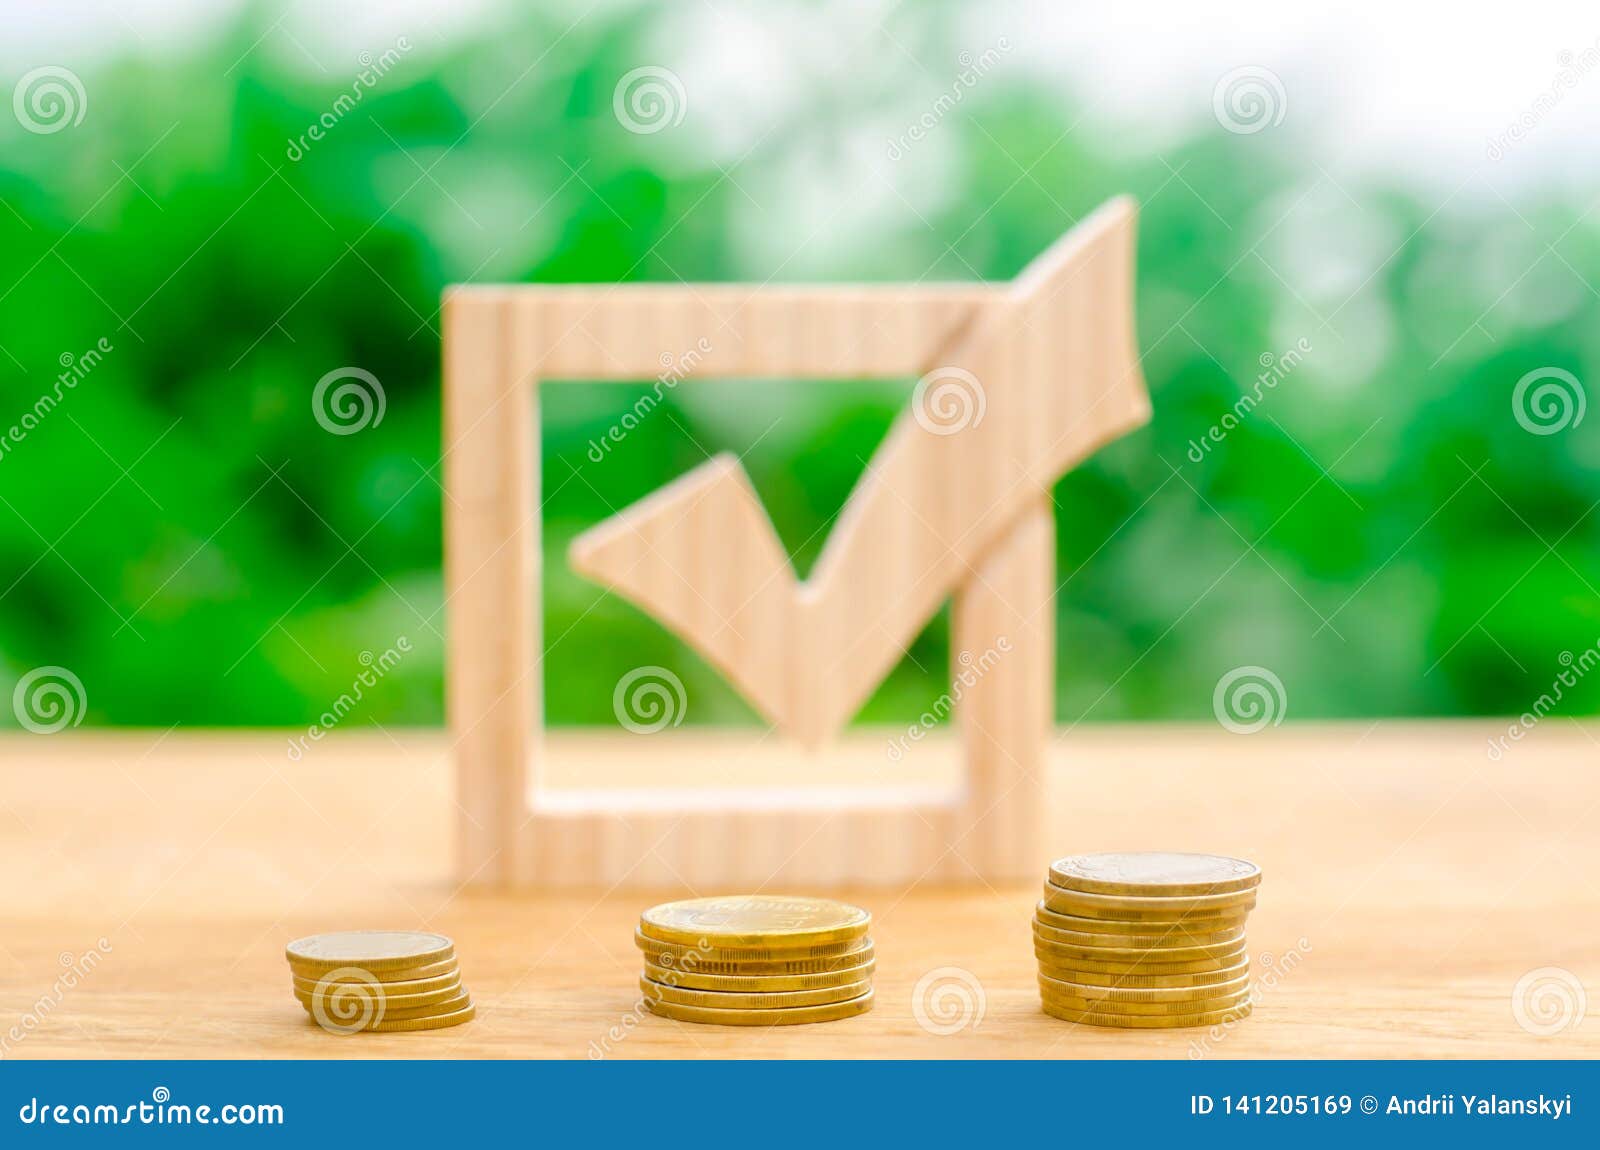 wooden check mark and stacks of coins. interest rates on deposits and loans. lobbying the adoption of regulations and laws.